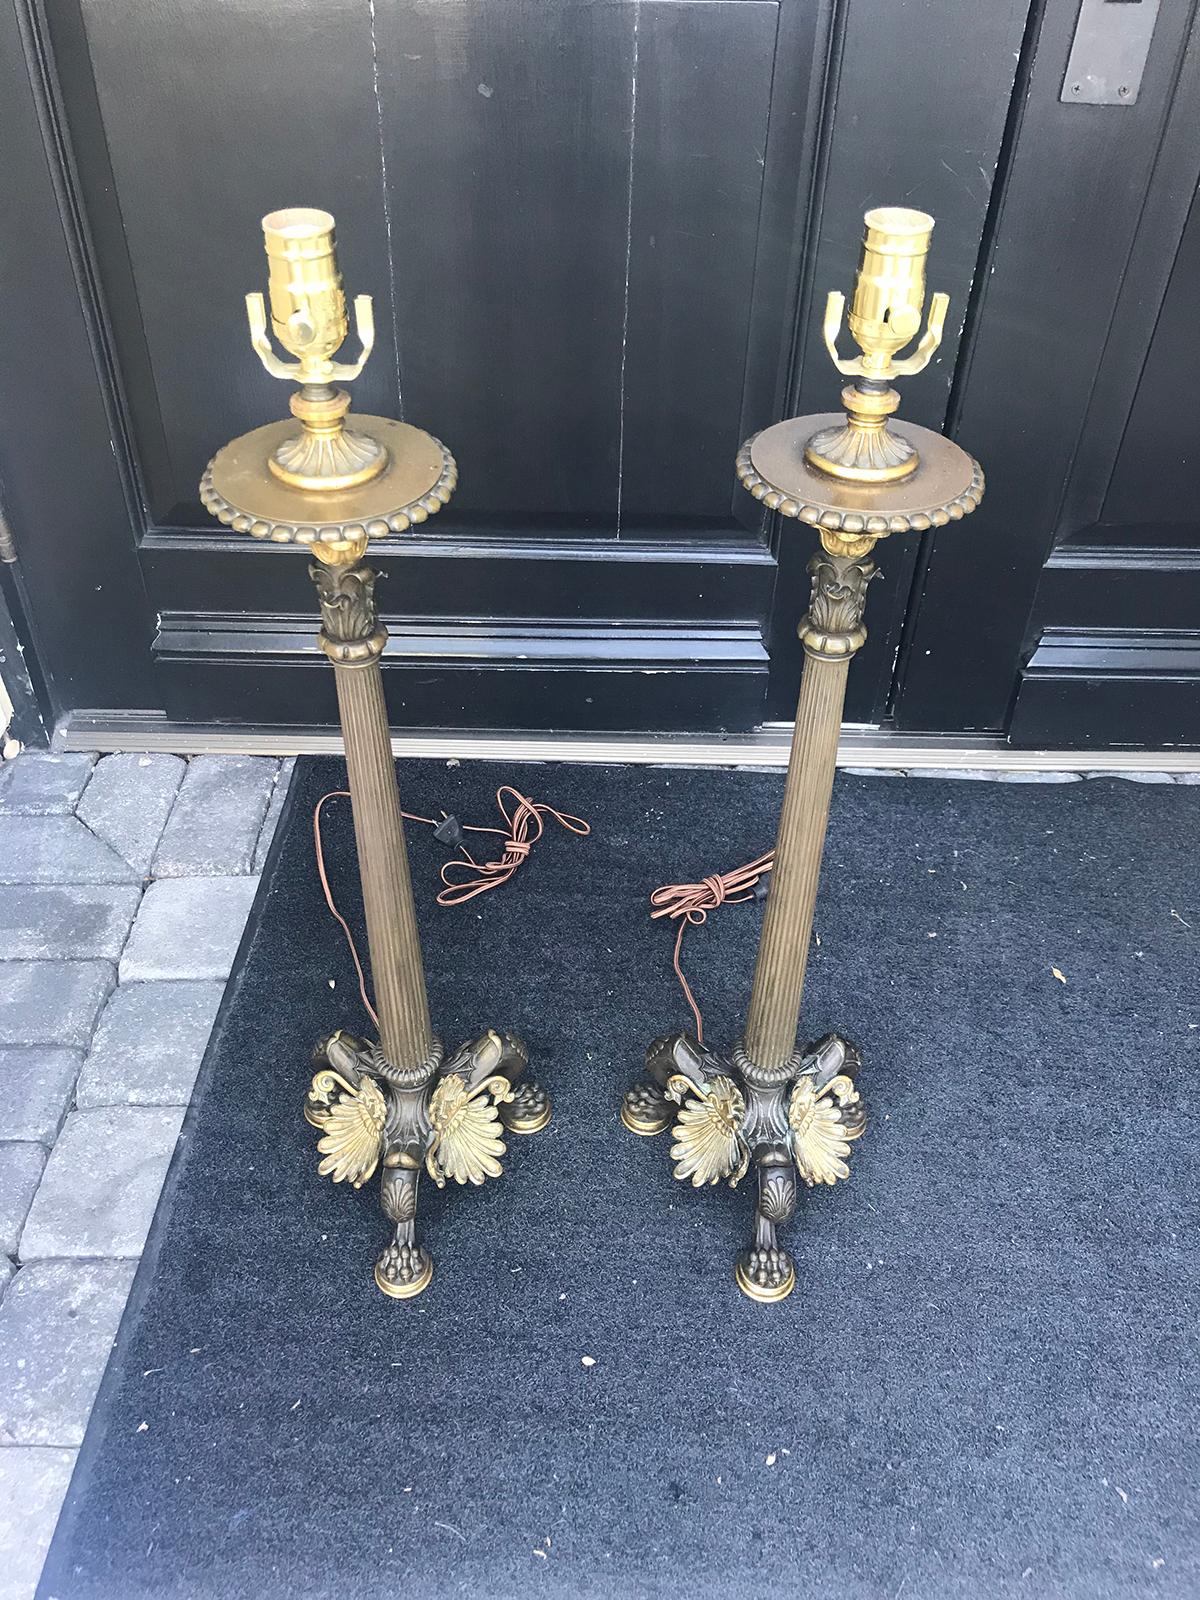 Pair of 19th century Empire candlesticks as lamps.